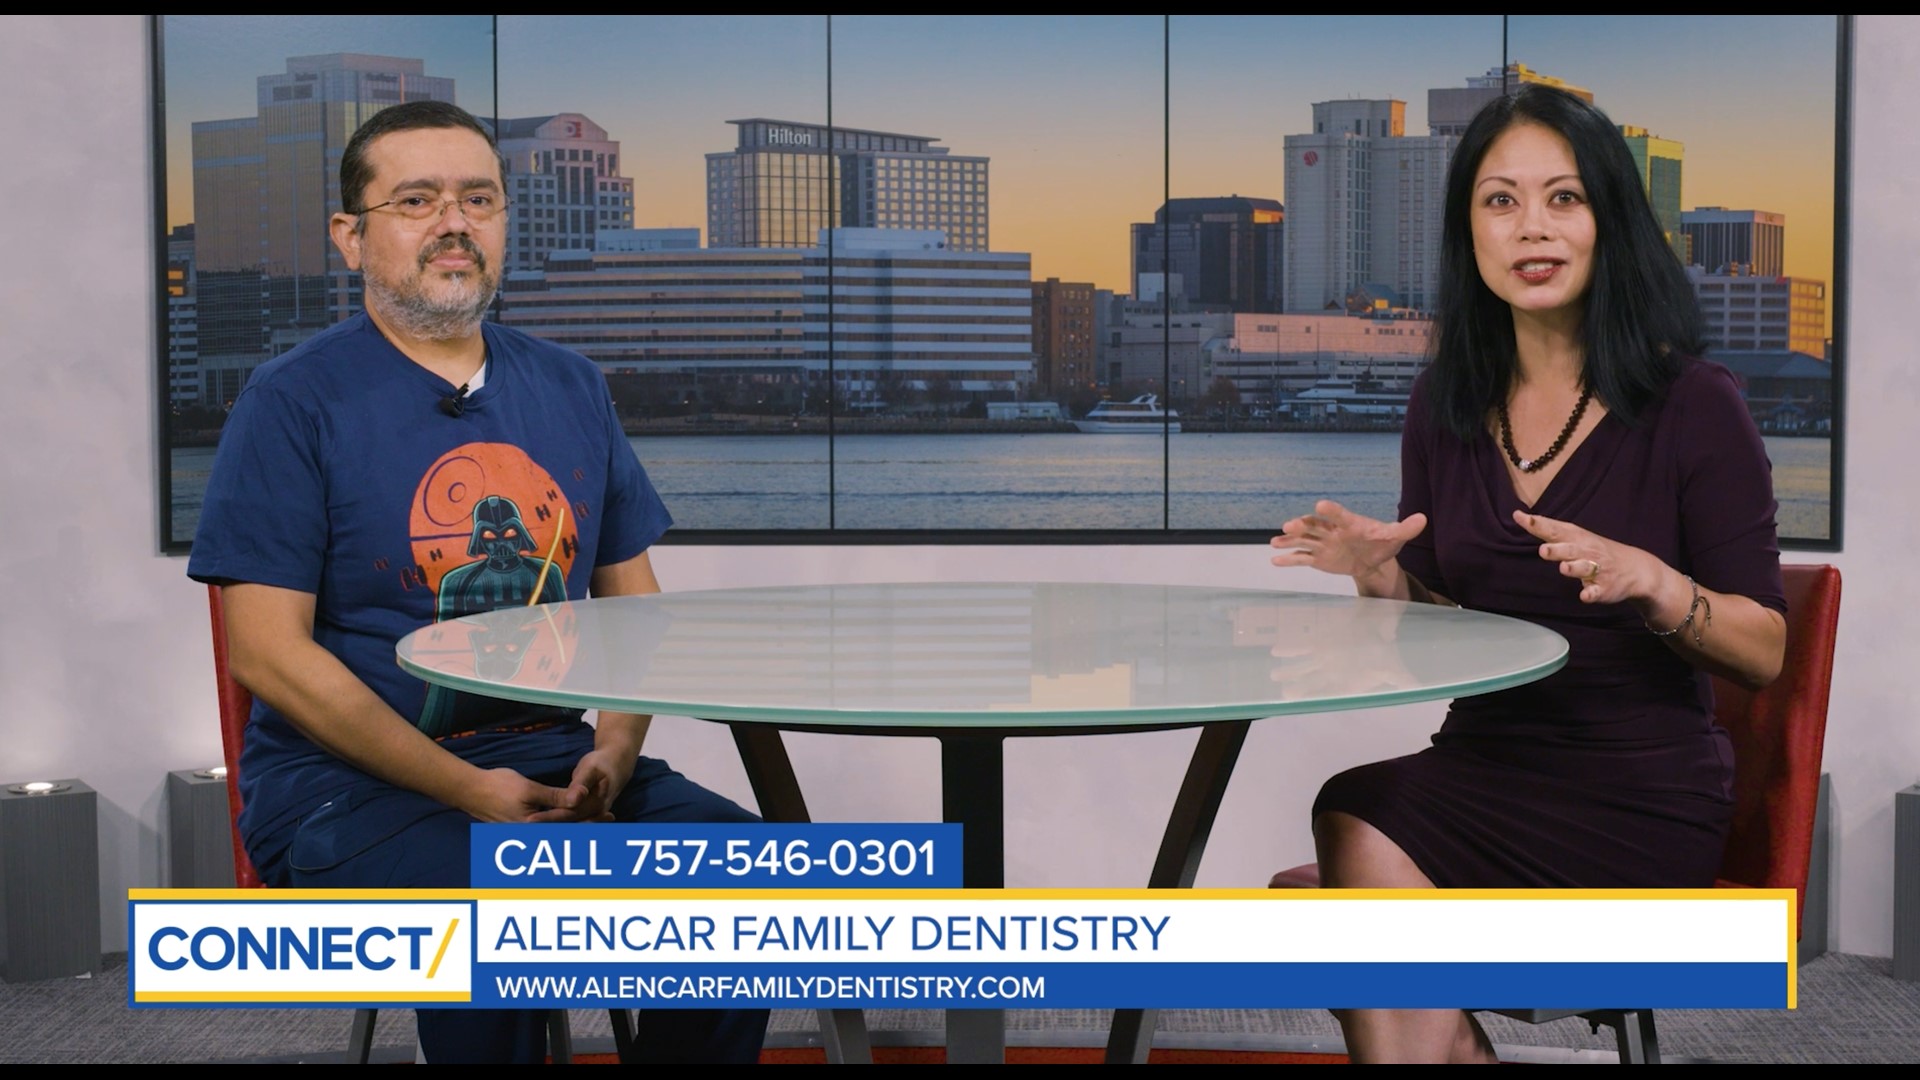 CONNECT sits down with Dr. Jayme Oliveira from Alencar Family Dentistry about some new technology being used at their business that can let you get a crown in a day!